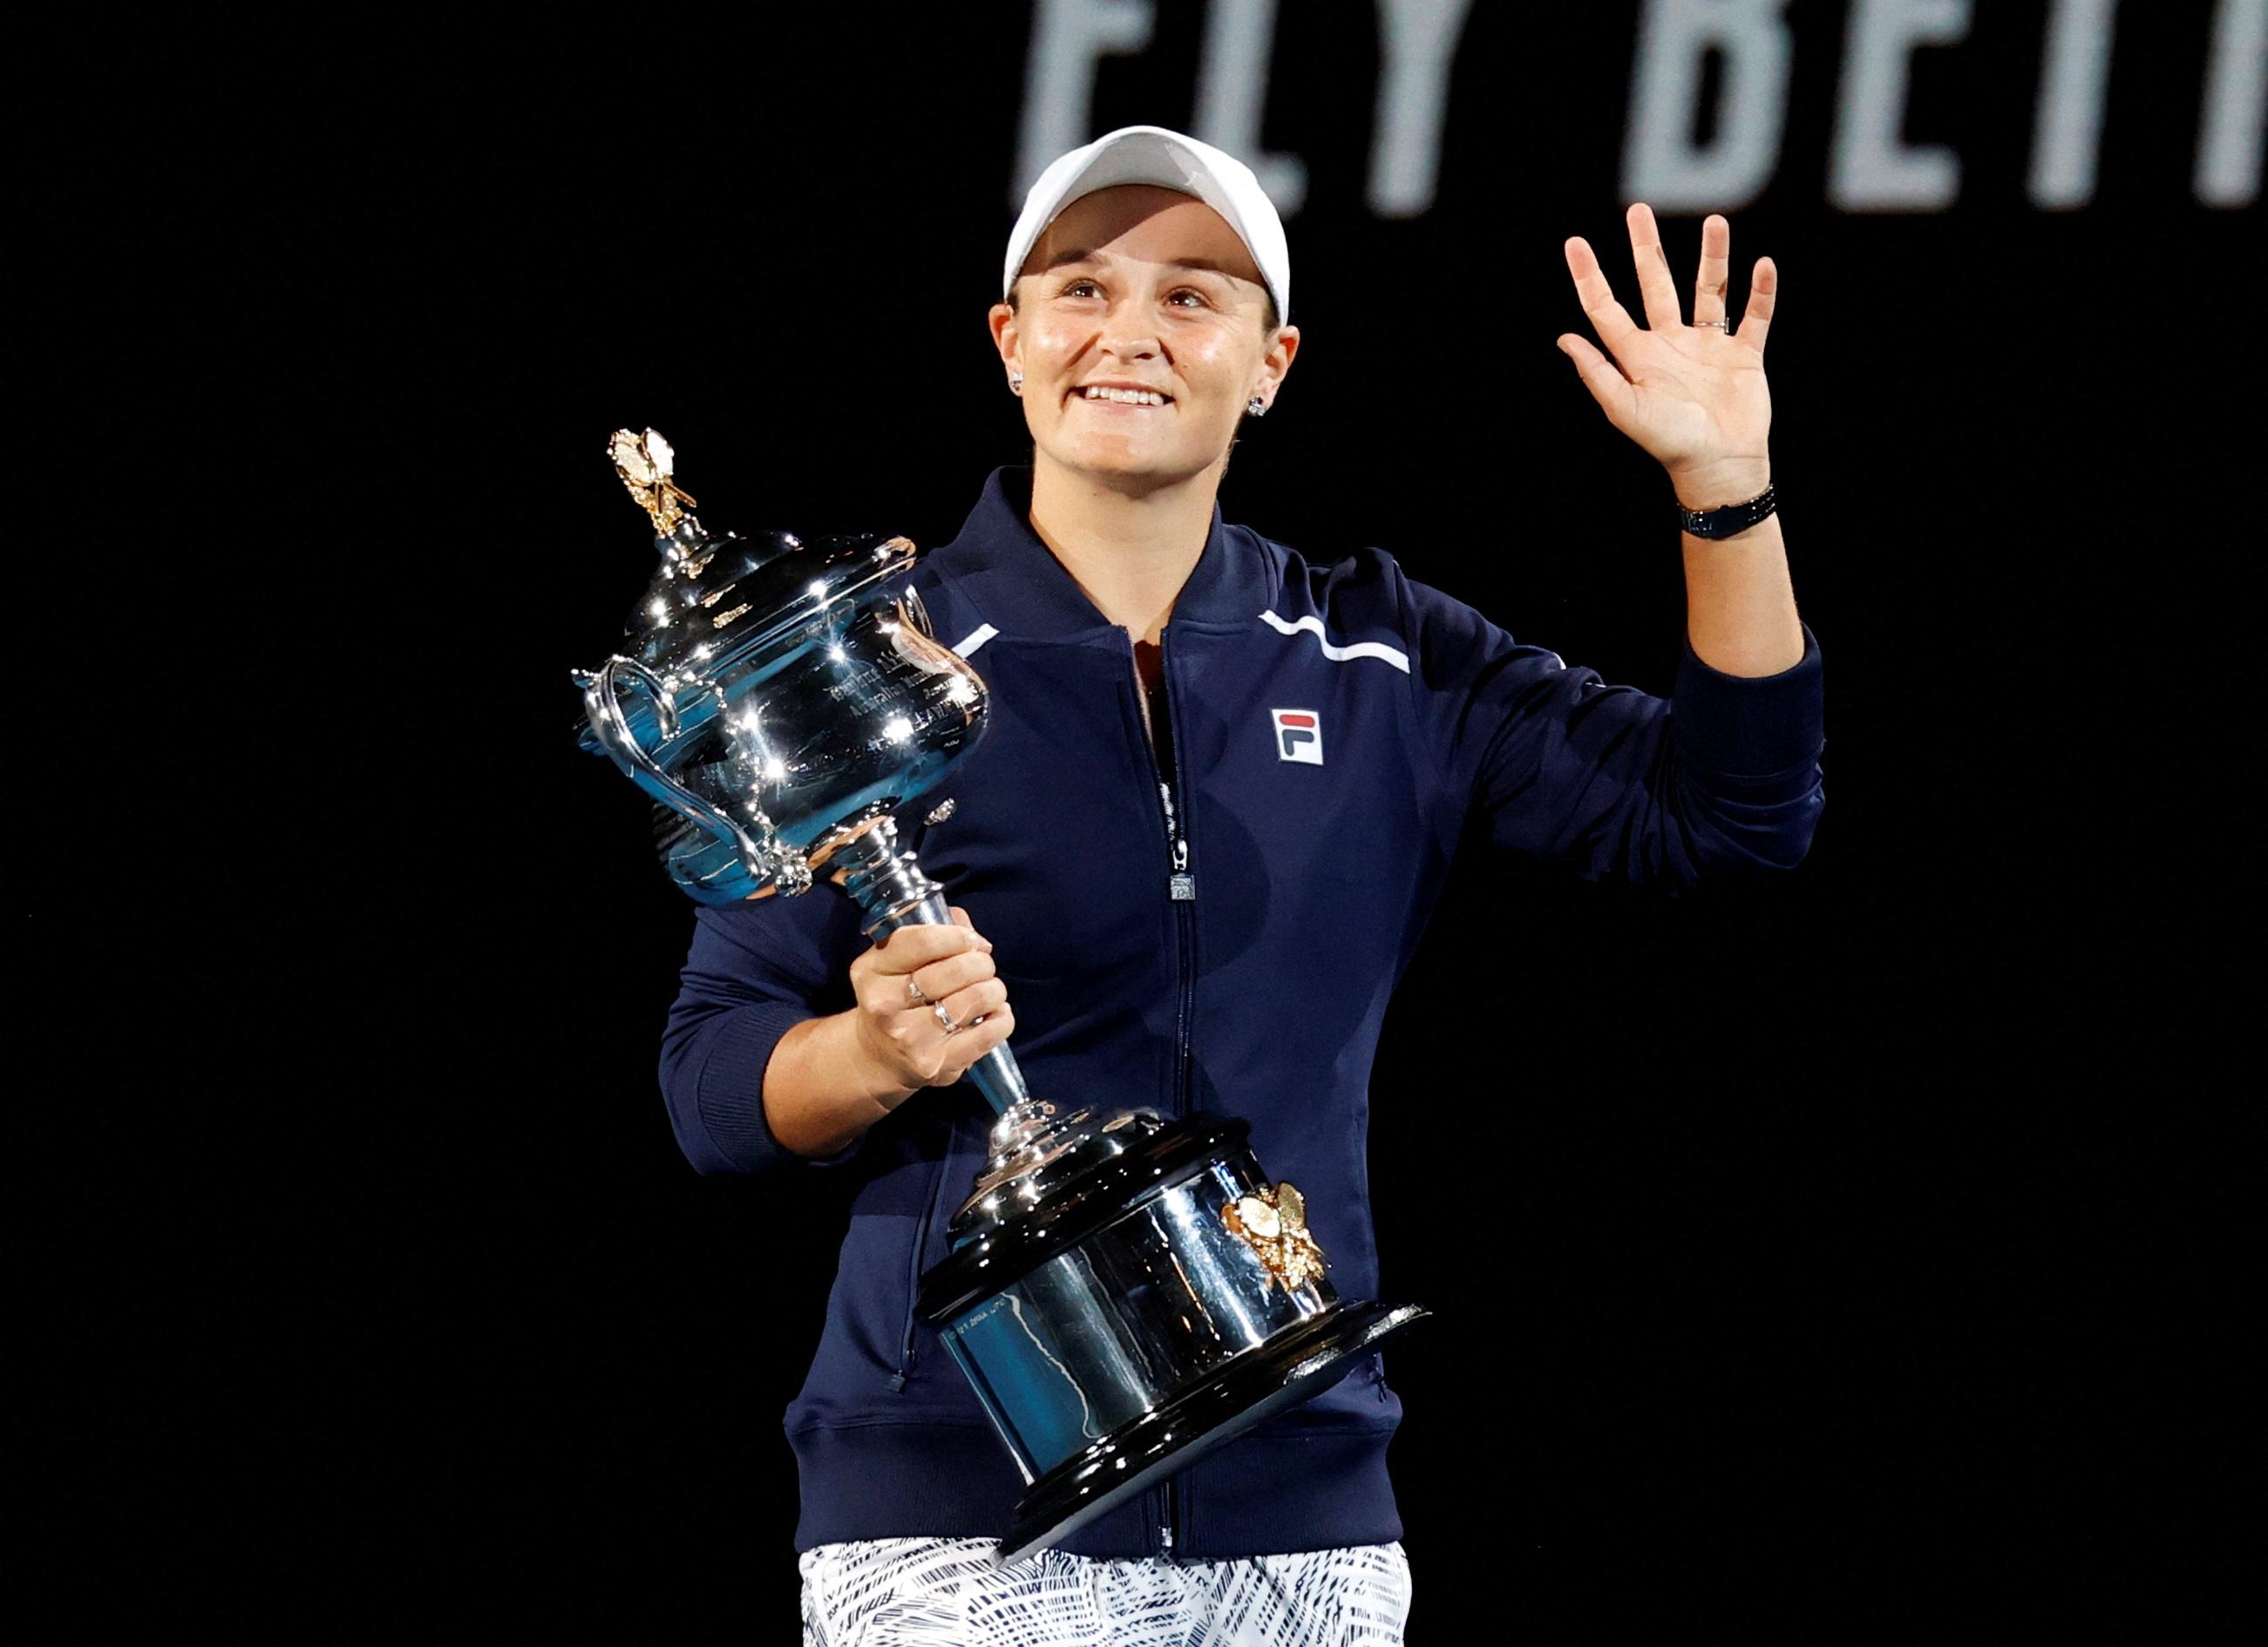 Ash Barty ends 44-year wait for home champion at Australian Open GMA News Online